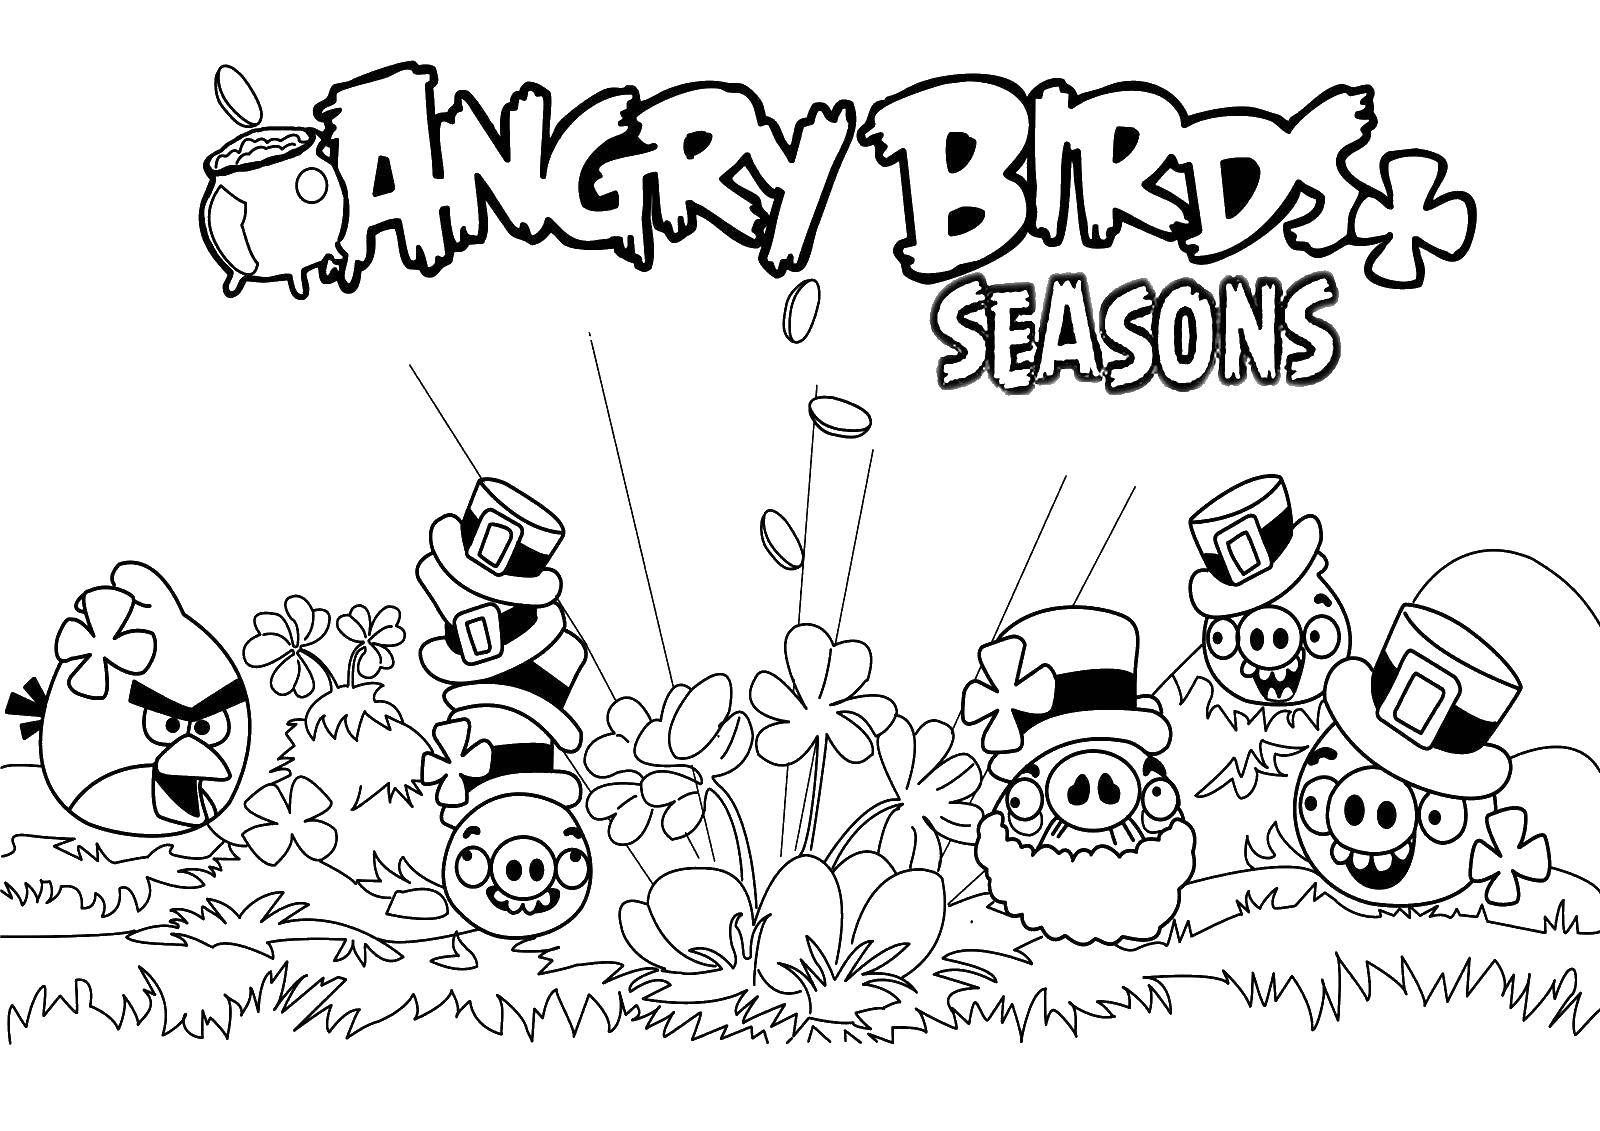 Coloring Pigs and birds from angry birds. Category angry birds. Tags:  angry birds, pig, bird.